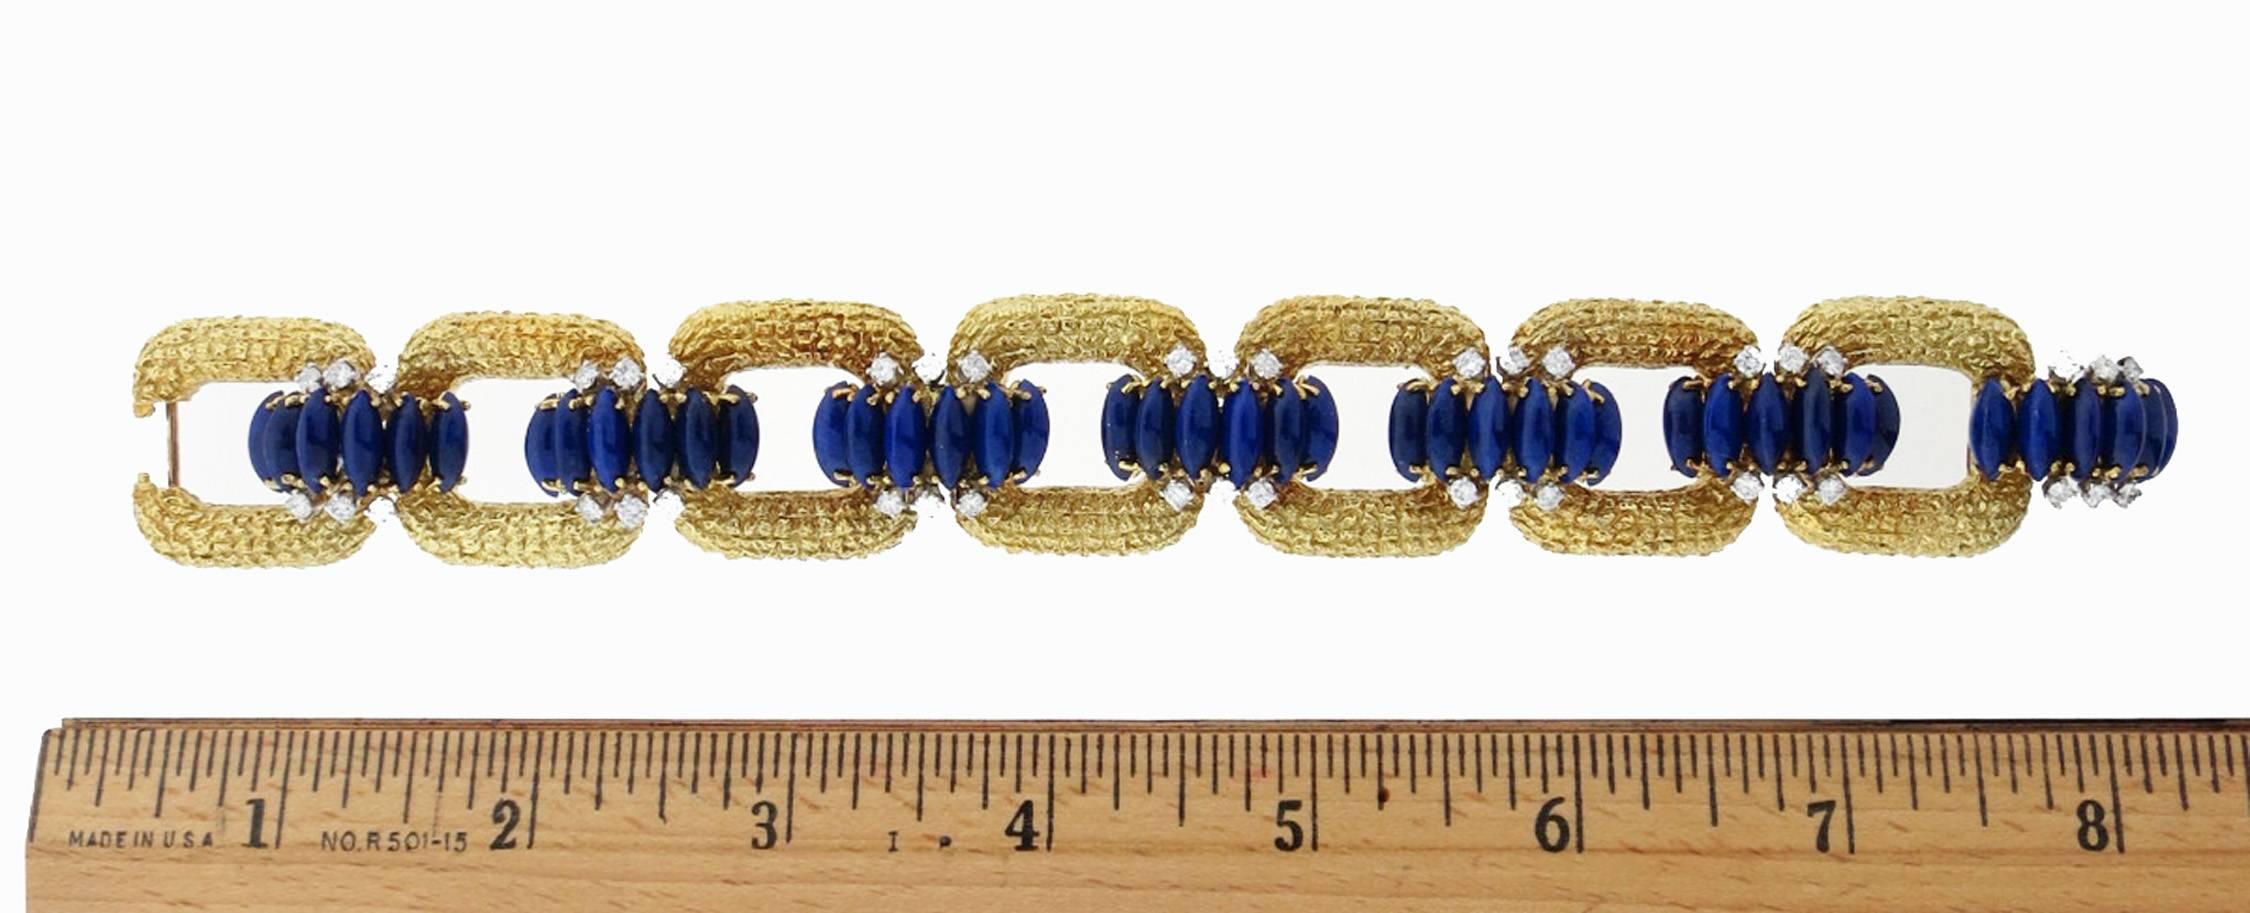 High style 18kt. crunchy yellow gold bracelet made by La Triomphe circa 1960. The bracelet measures approx 8 inches in length and 1 inch in width. Each curved connector link is prong set with six marquise shape natural rich blue lapis lazuli and